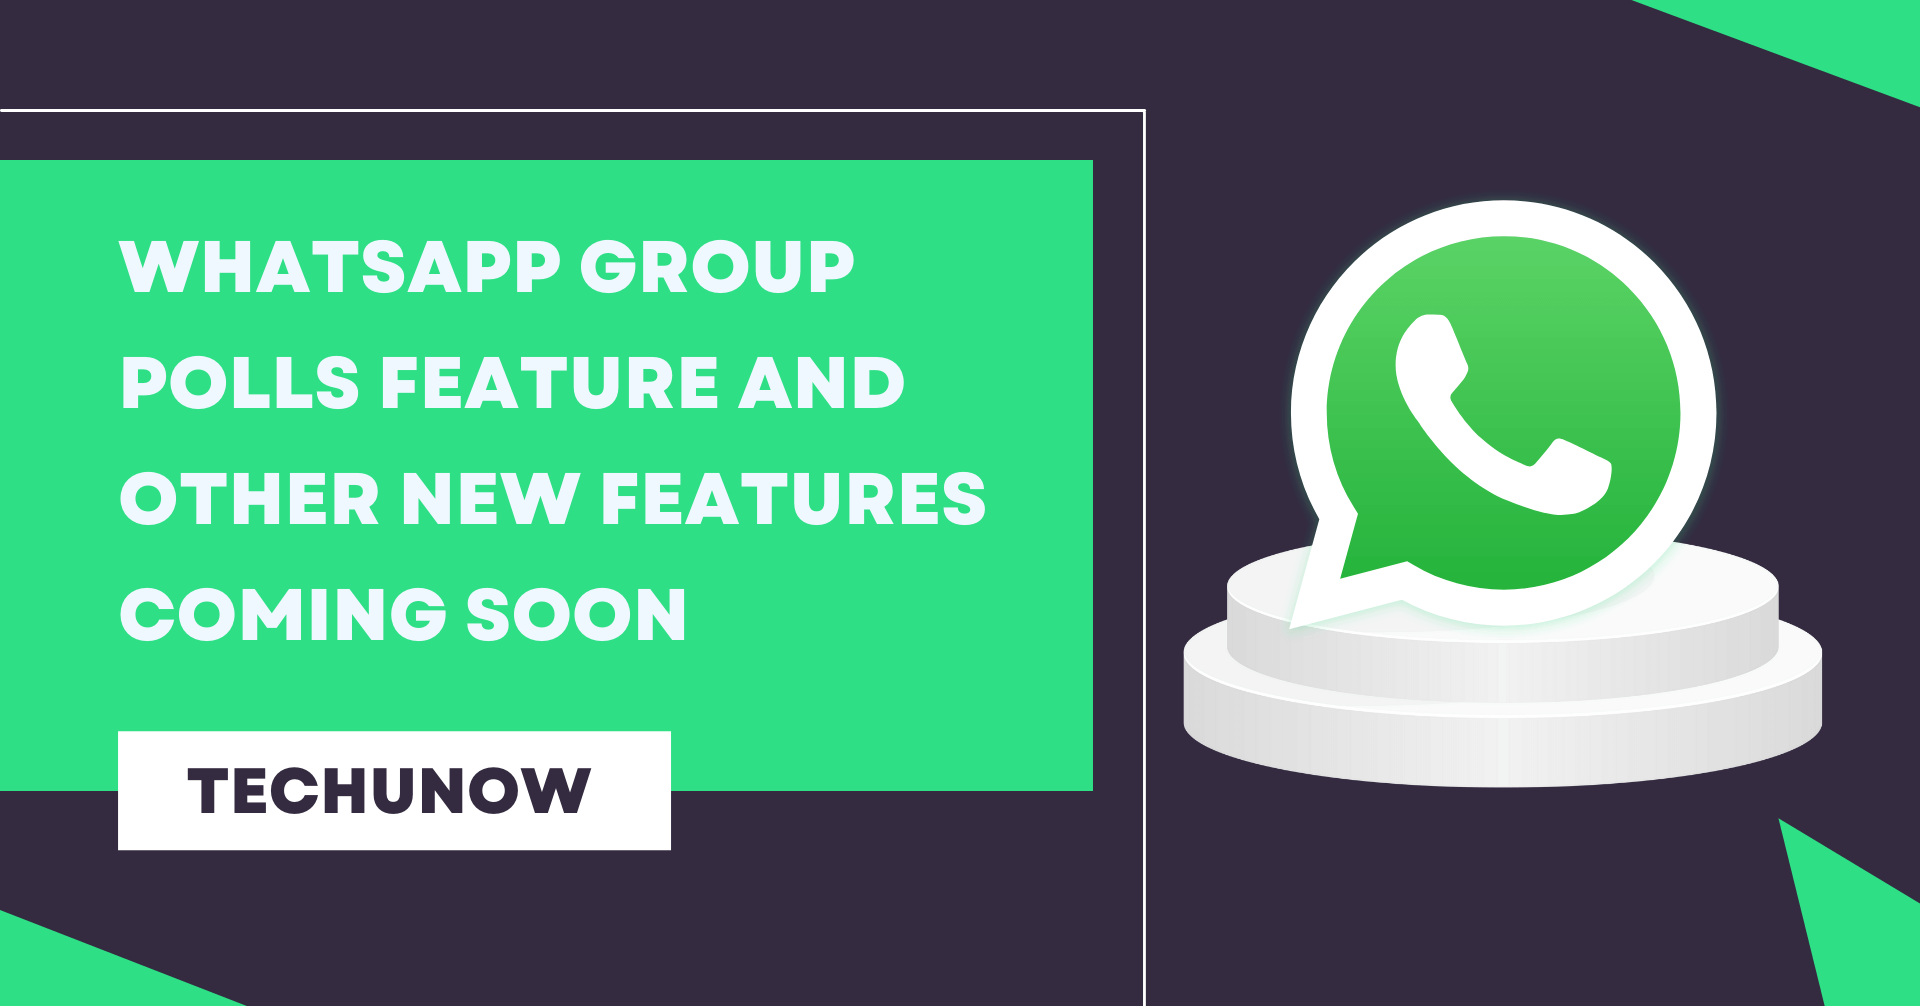 WhatsApp Group Polls Feature & Emoji-based Reply Button Releasing Soon